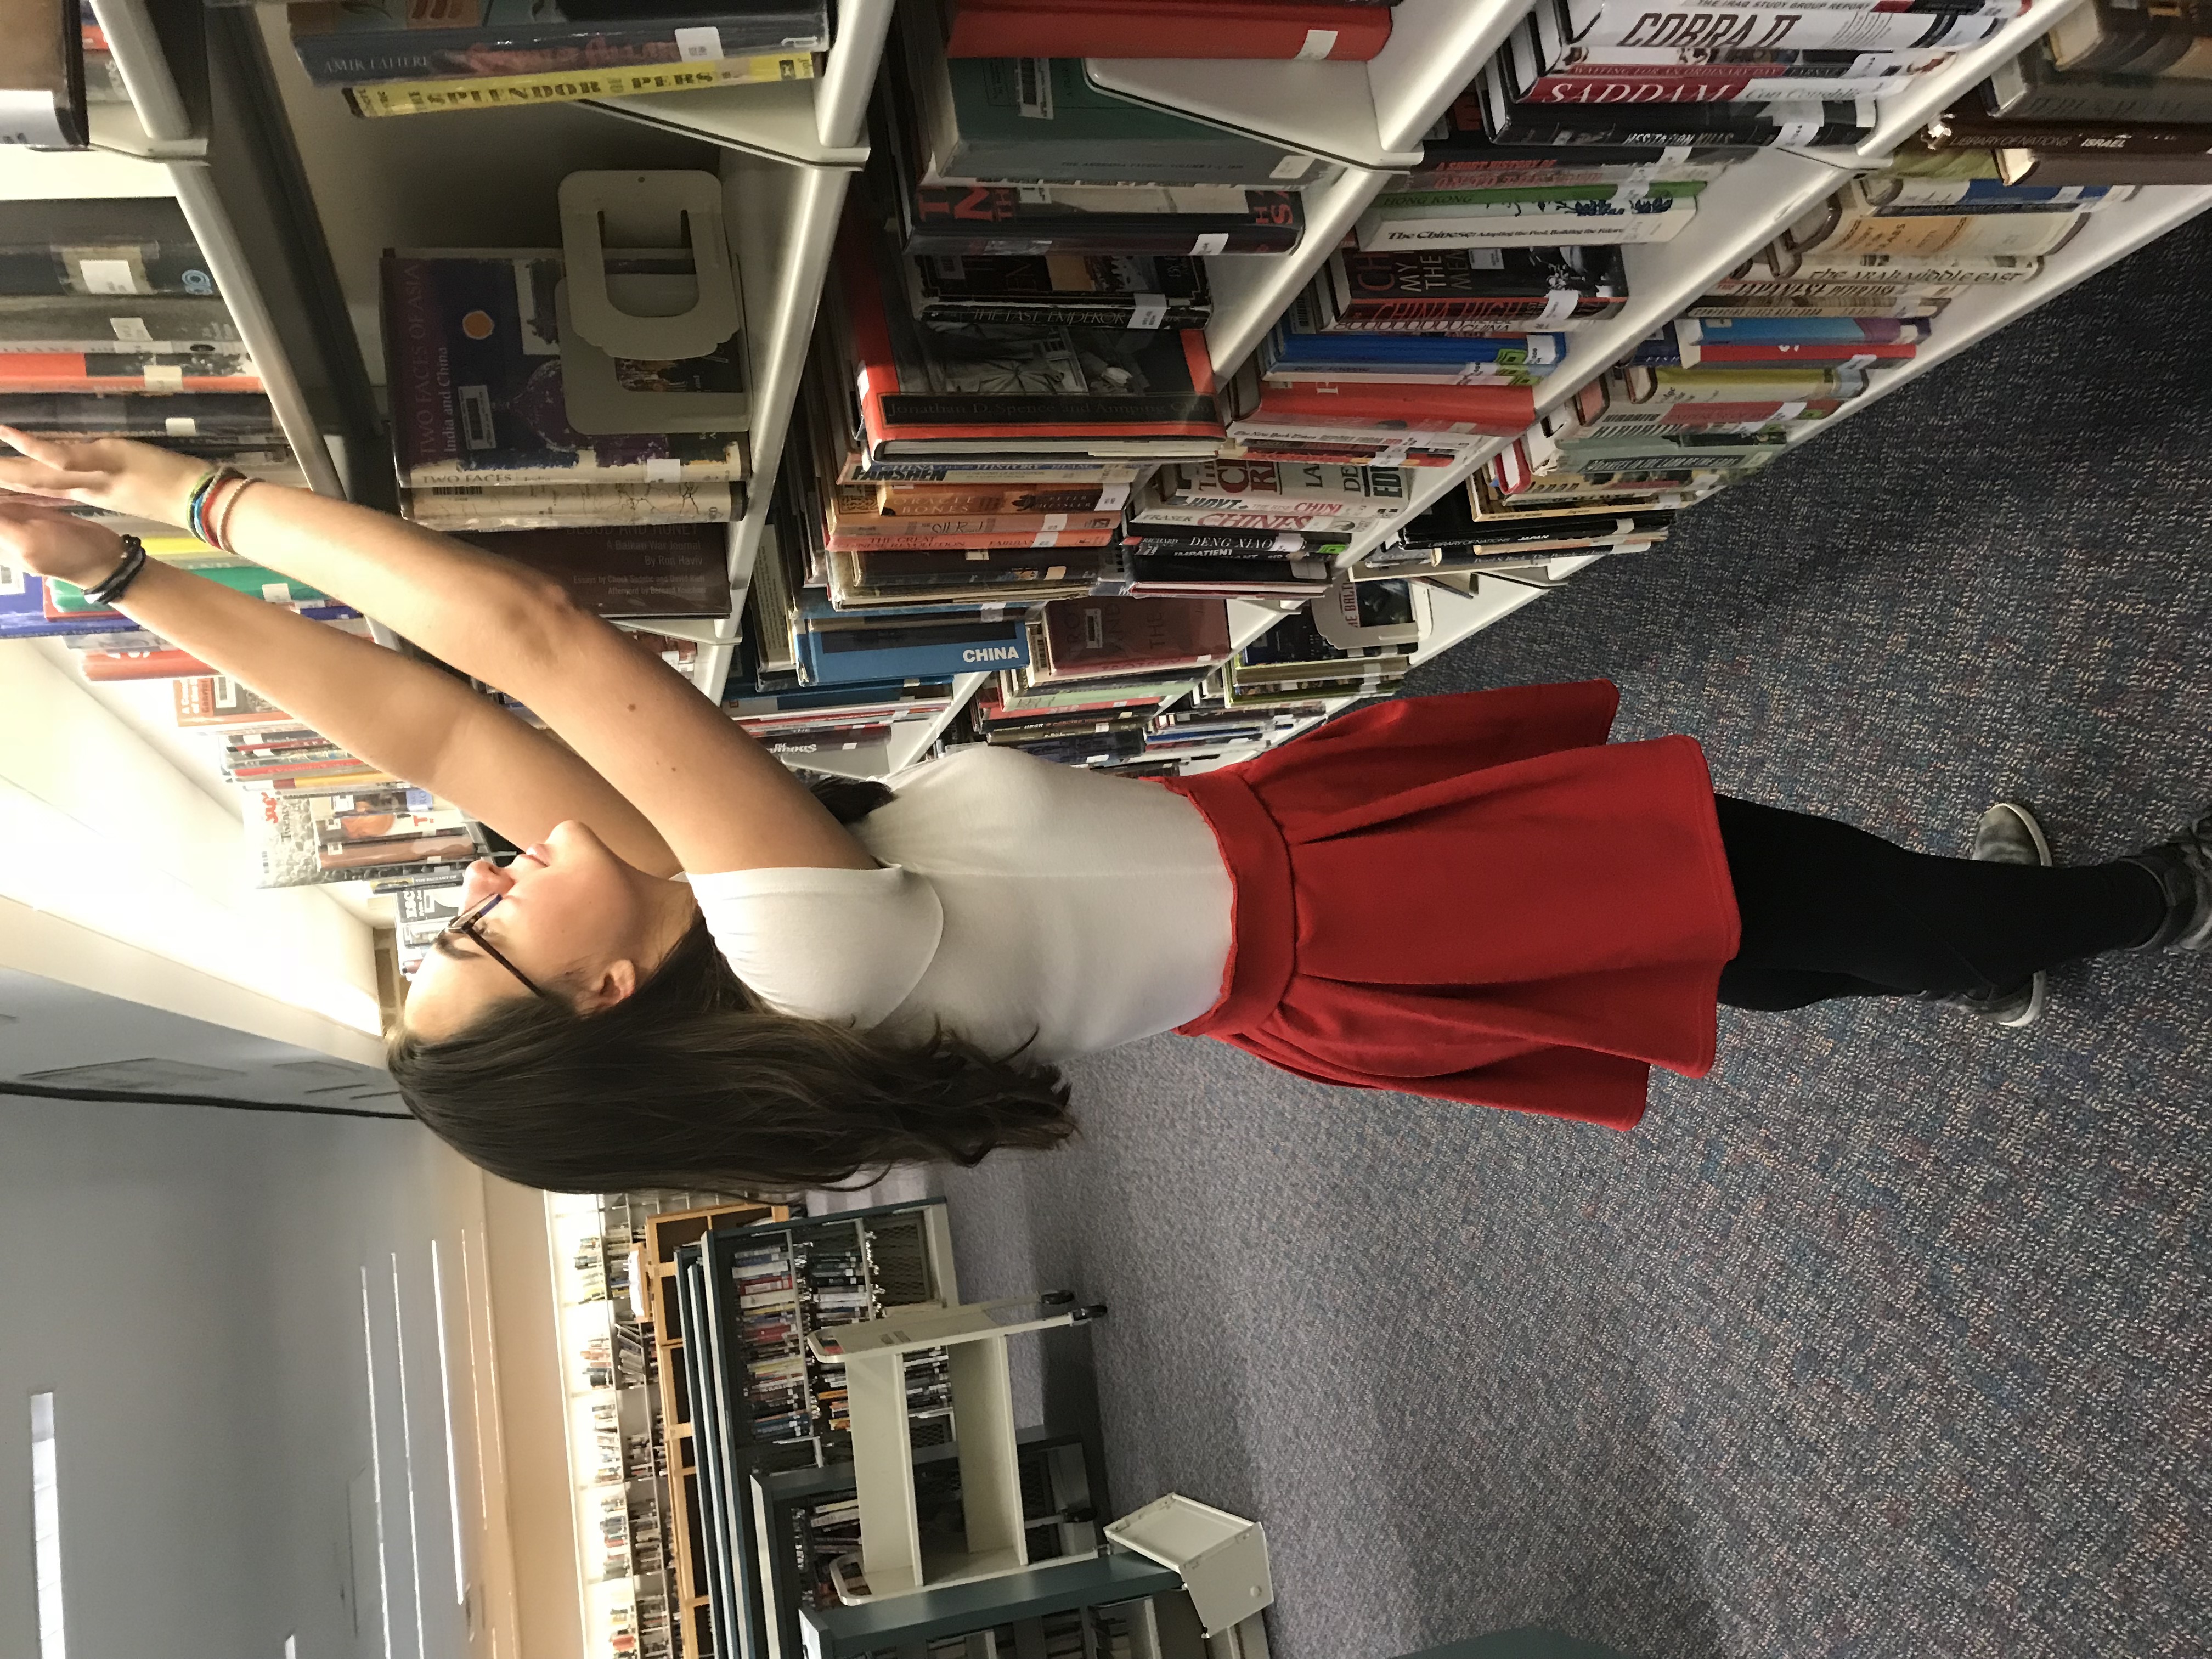 Searching for books in the library